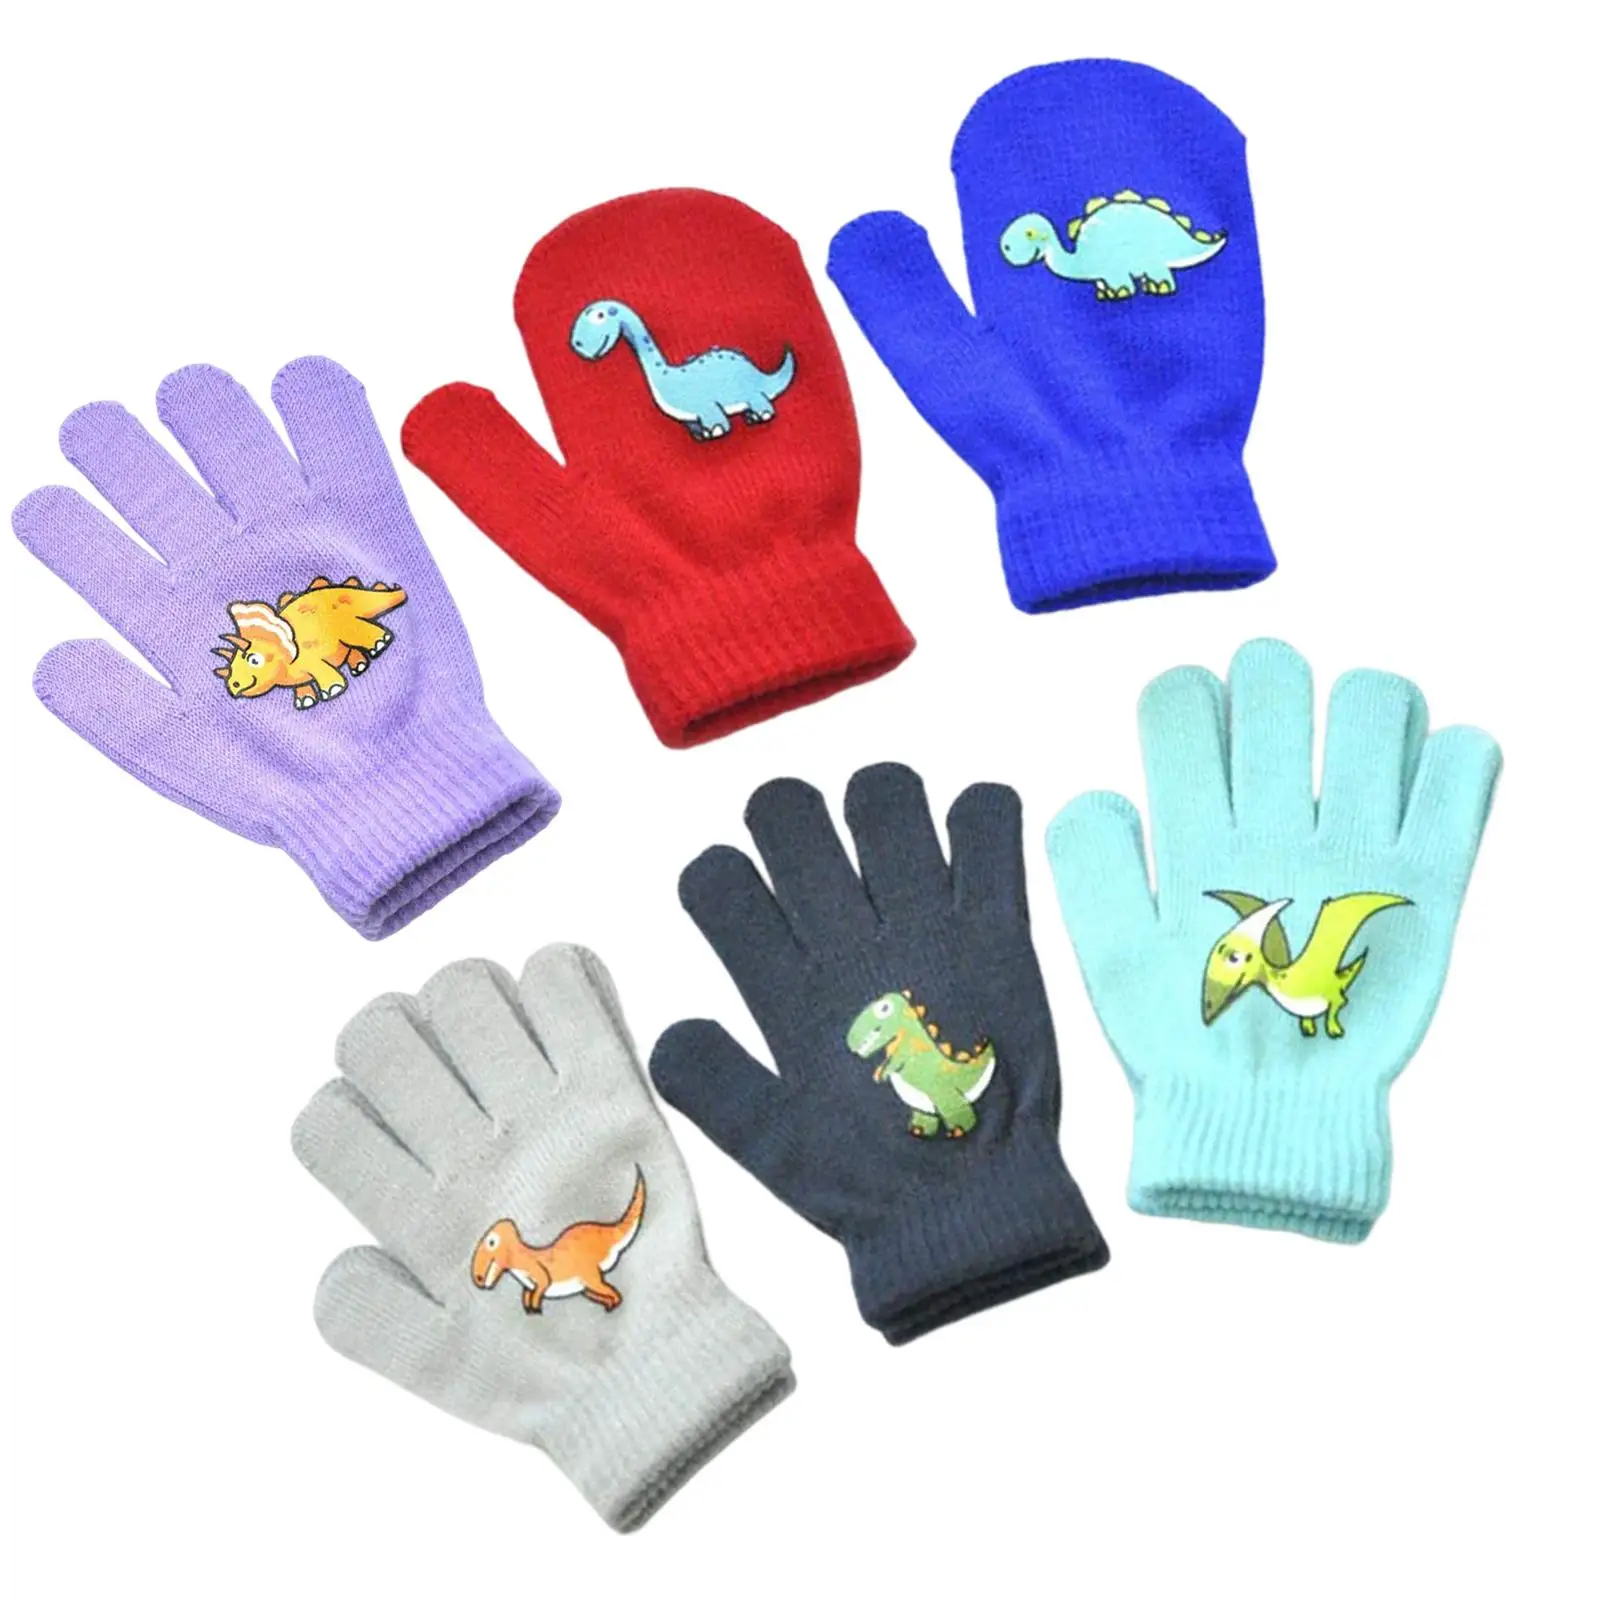 12x Warm Knitted Gloves Girls Outdoor Sports Boys Cycling Kids Gloves Winter